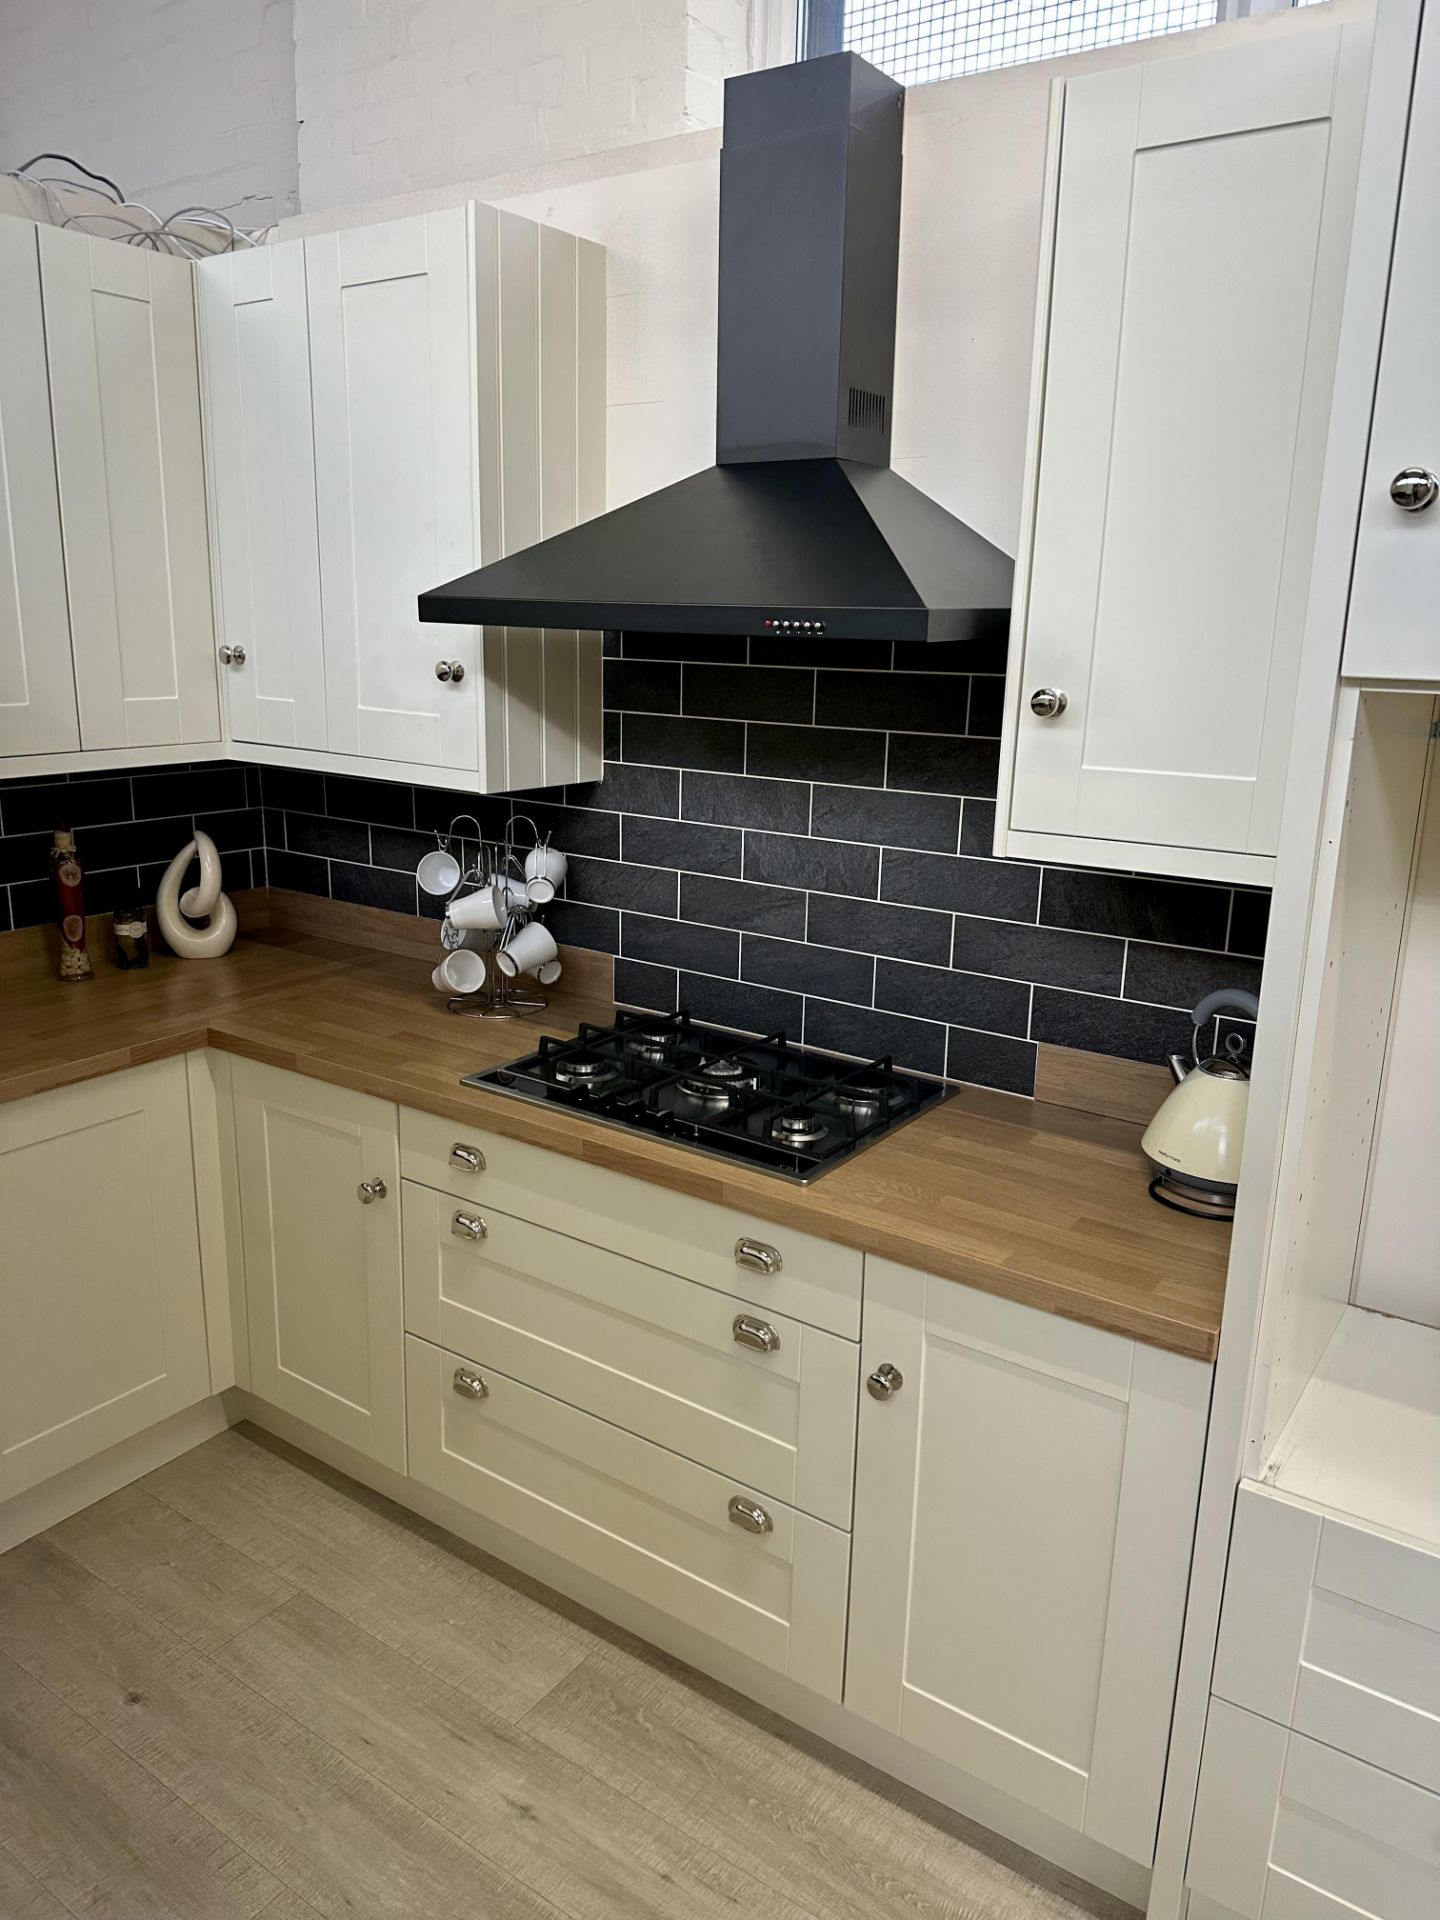 Omega English Rose Kitchen Display w/ Hob, Extractor, Sink & Tap - RRP£11,866 - See Pics & Desc - Image 5 of 25